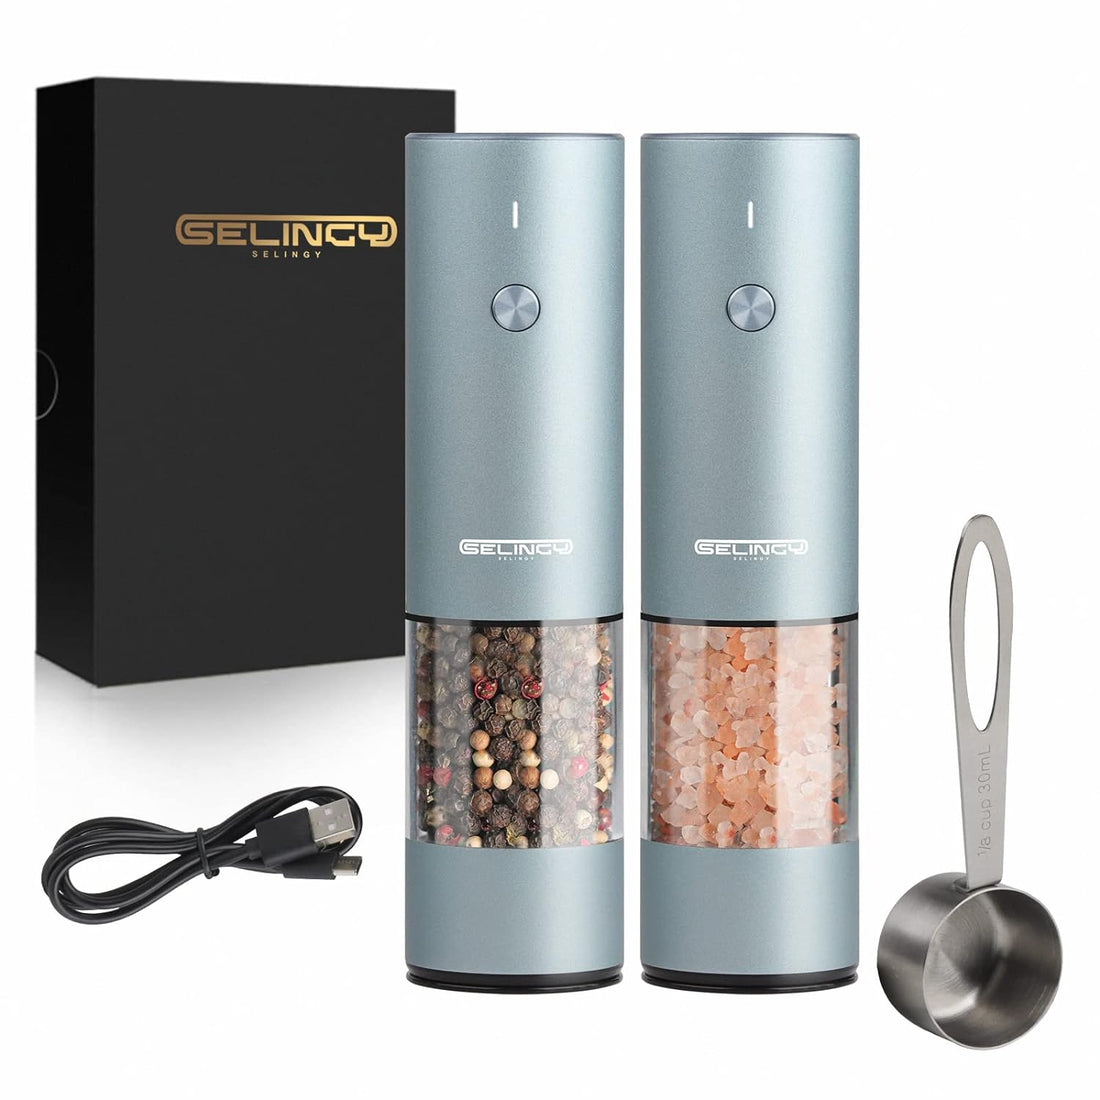 Rechargeable Electric Salt and Pepper Grinder Set - with USB Type-C Cable, LED Lights, Automatic Modern Electric Pepper Mill, One Hand Operation (Baby Blue)